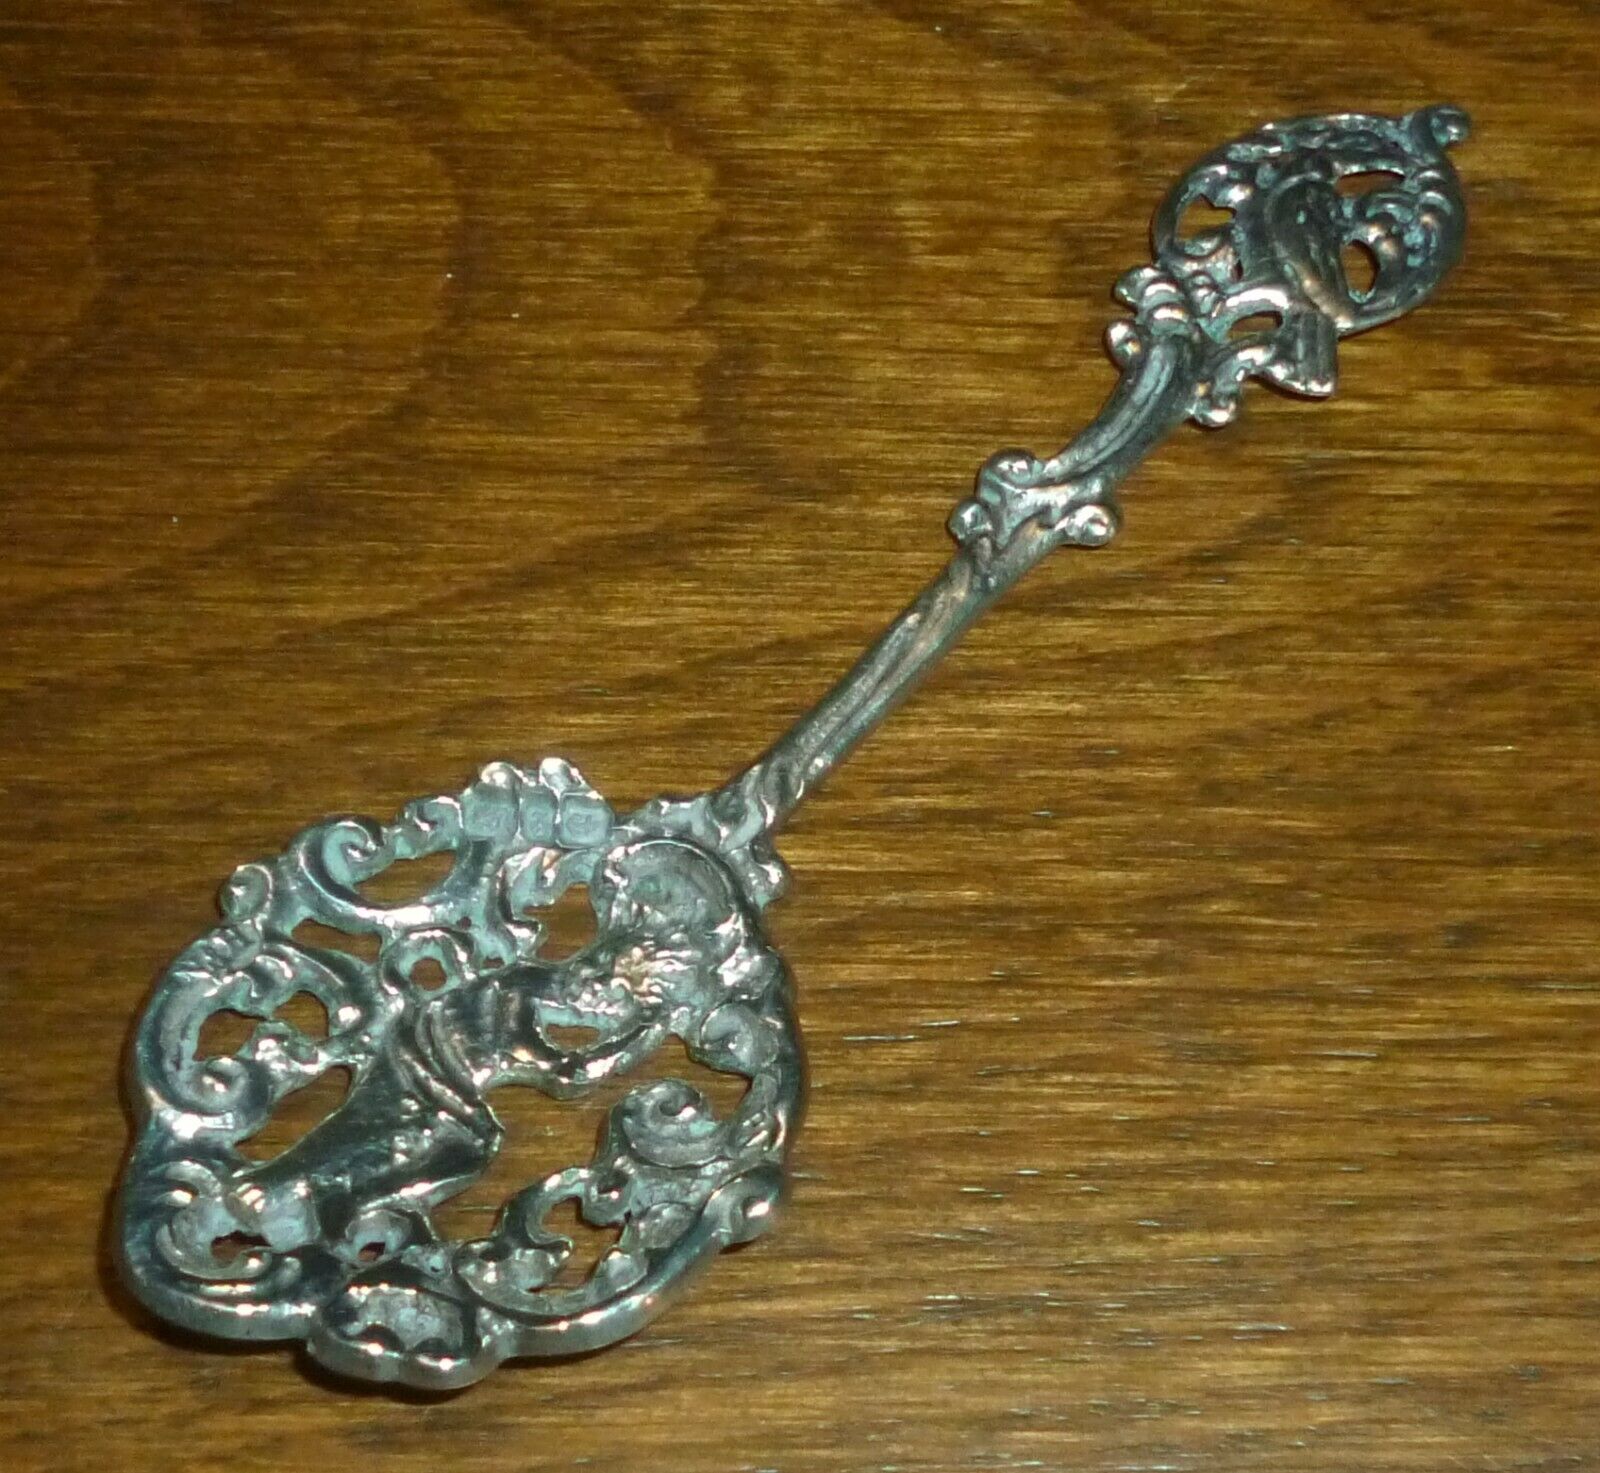 Antique Solid Silver Pierced Decorated Caddy Spoon by Nathan & Hayes, B'ham 1893